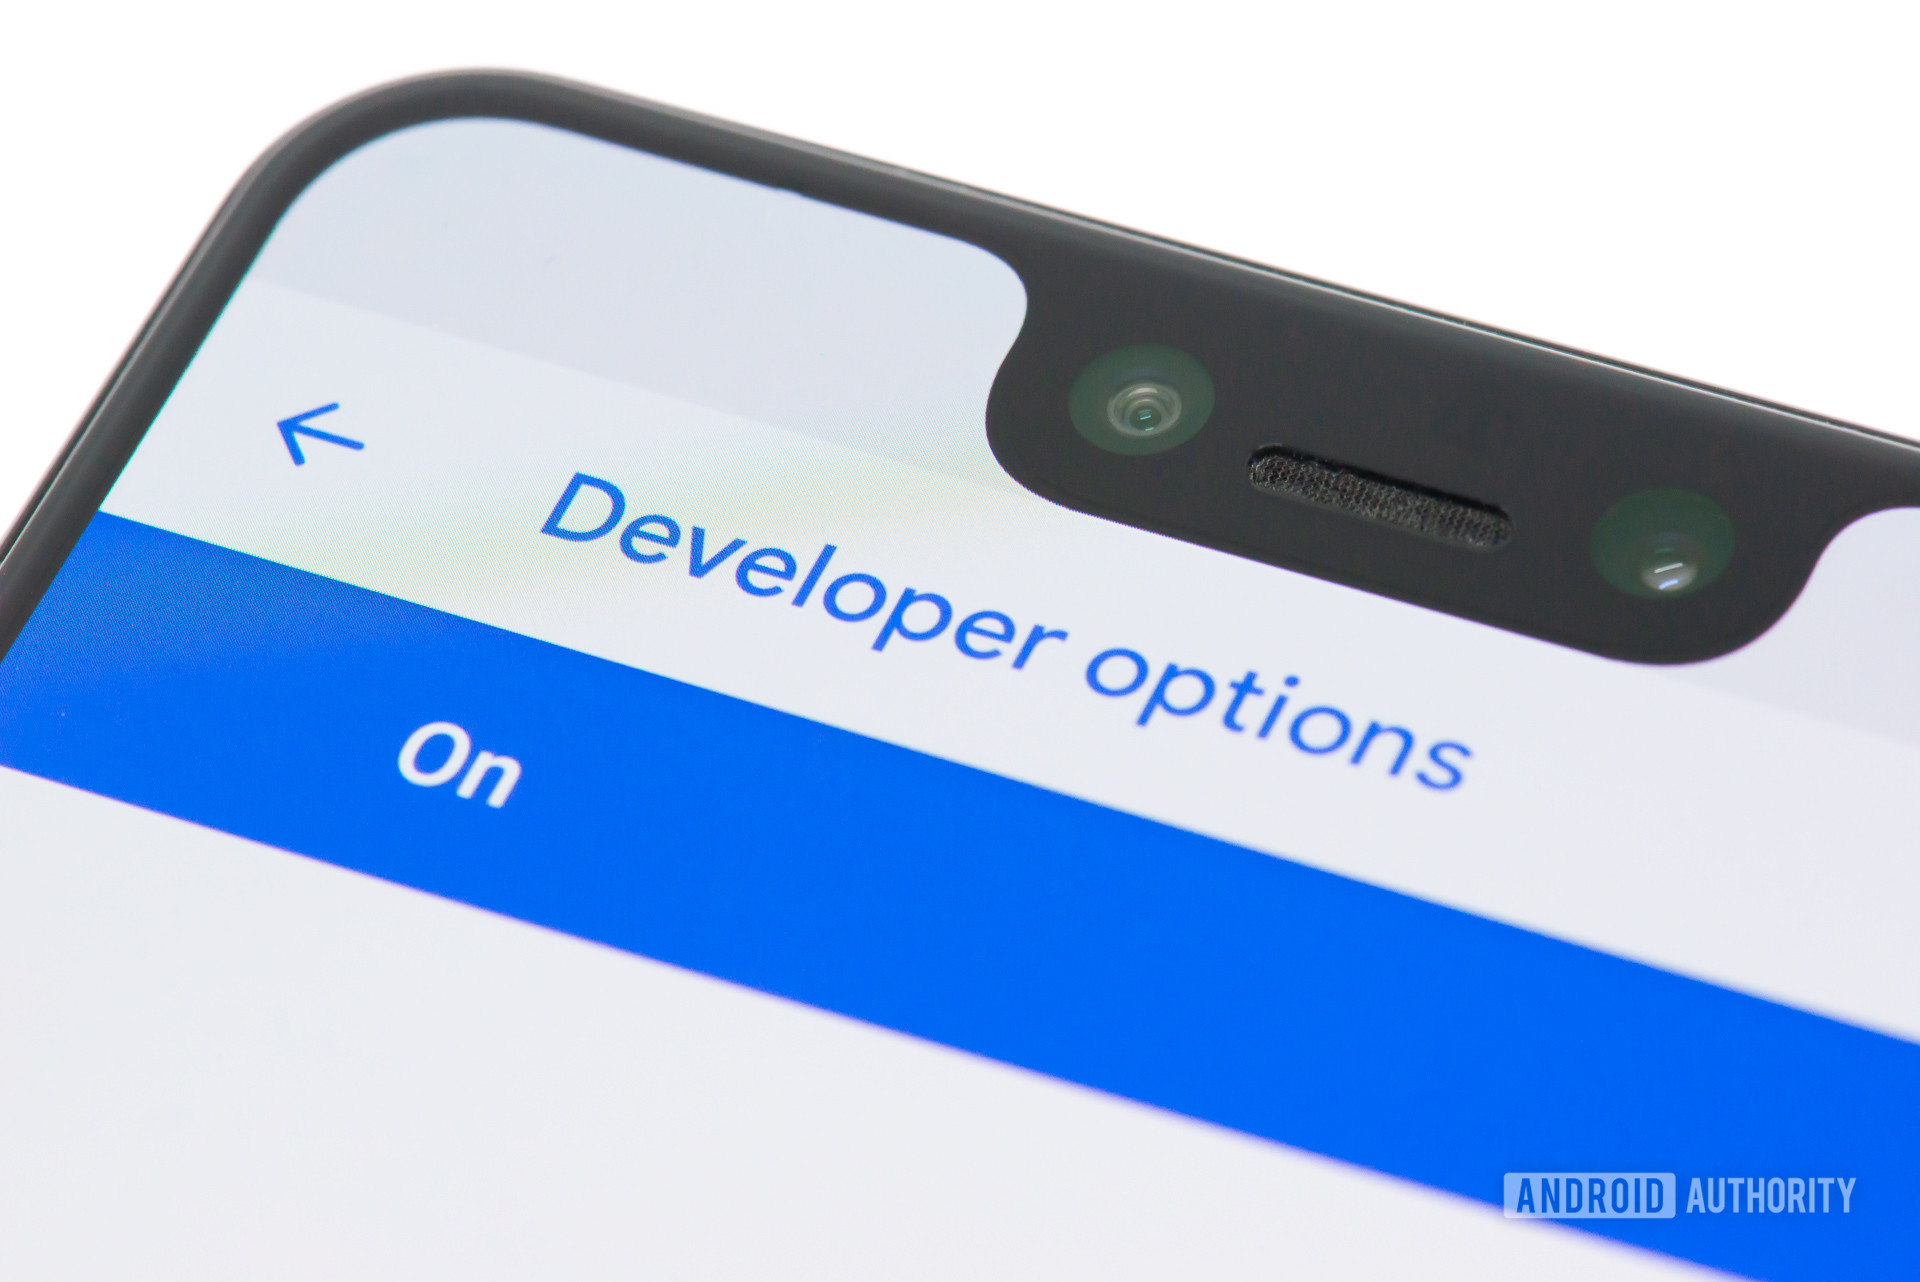 Developer options menu on a Pixel 3 XL Android phone